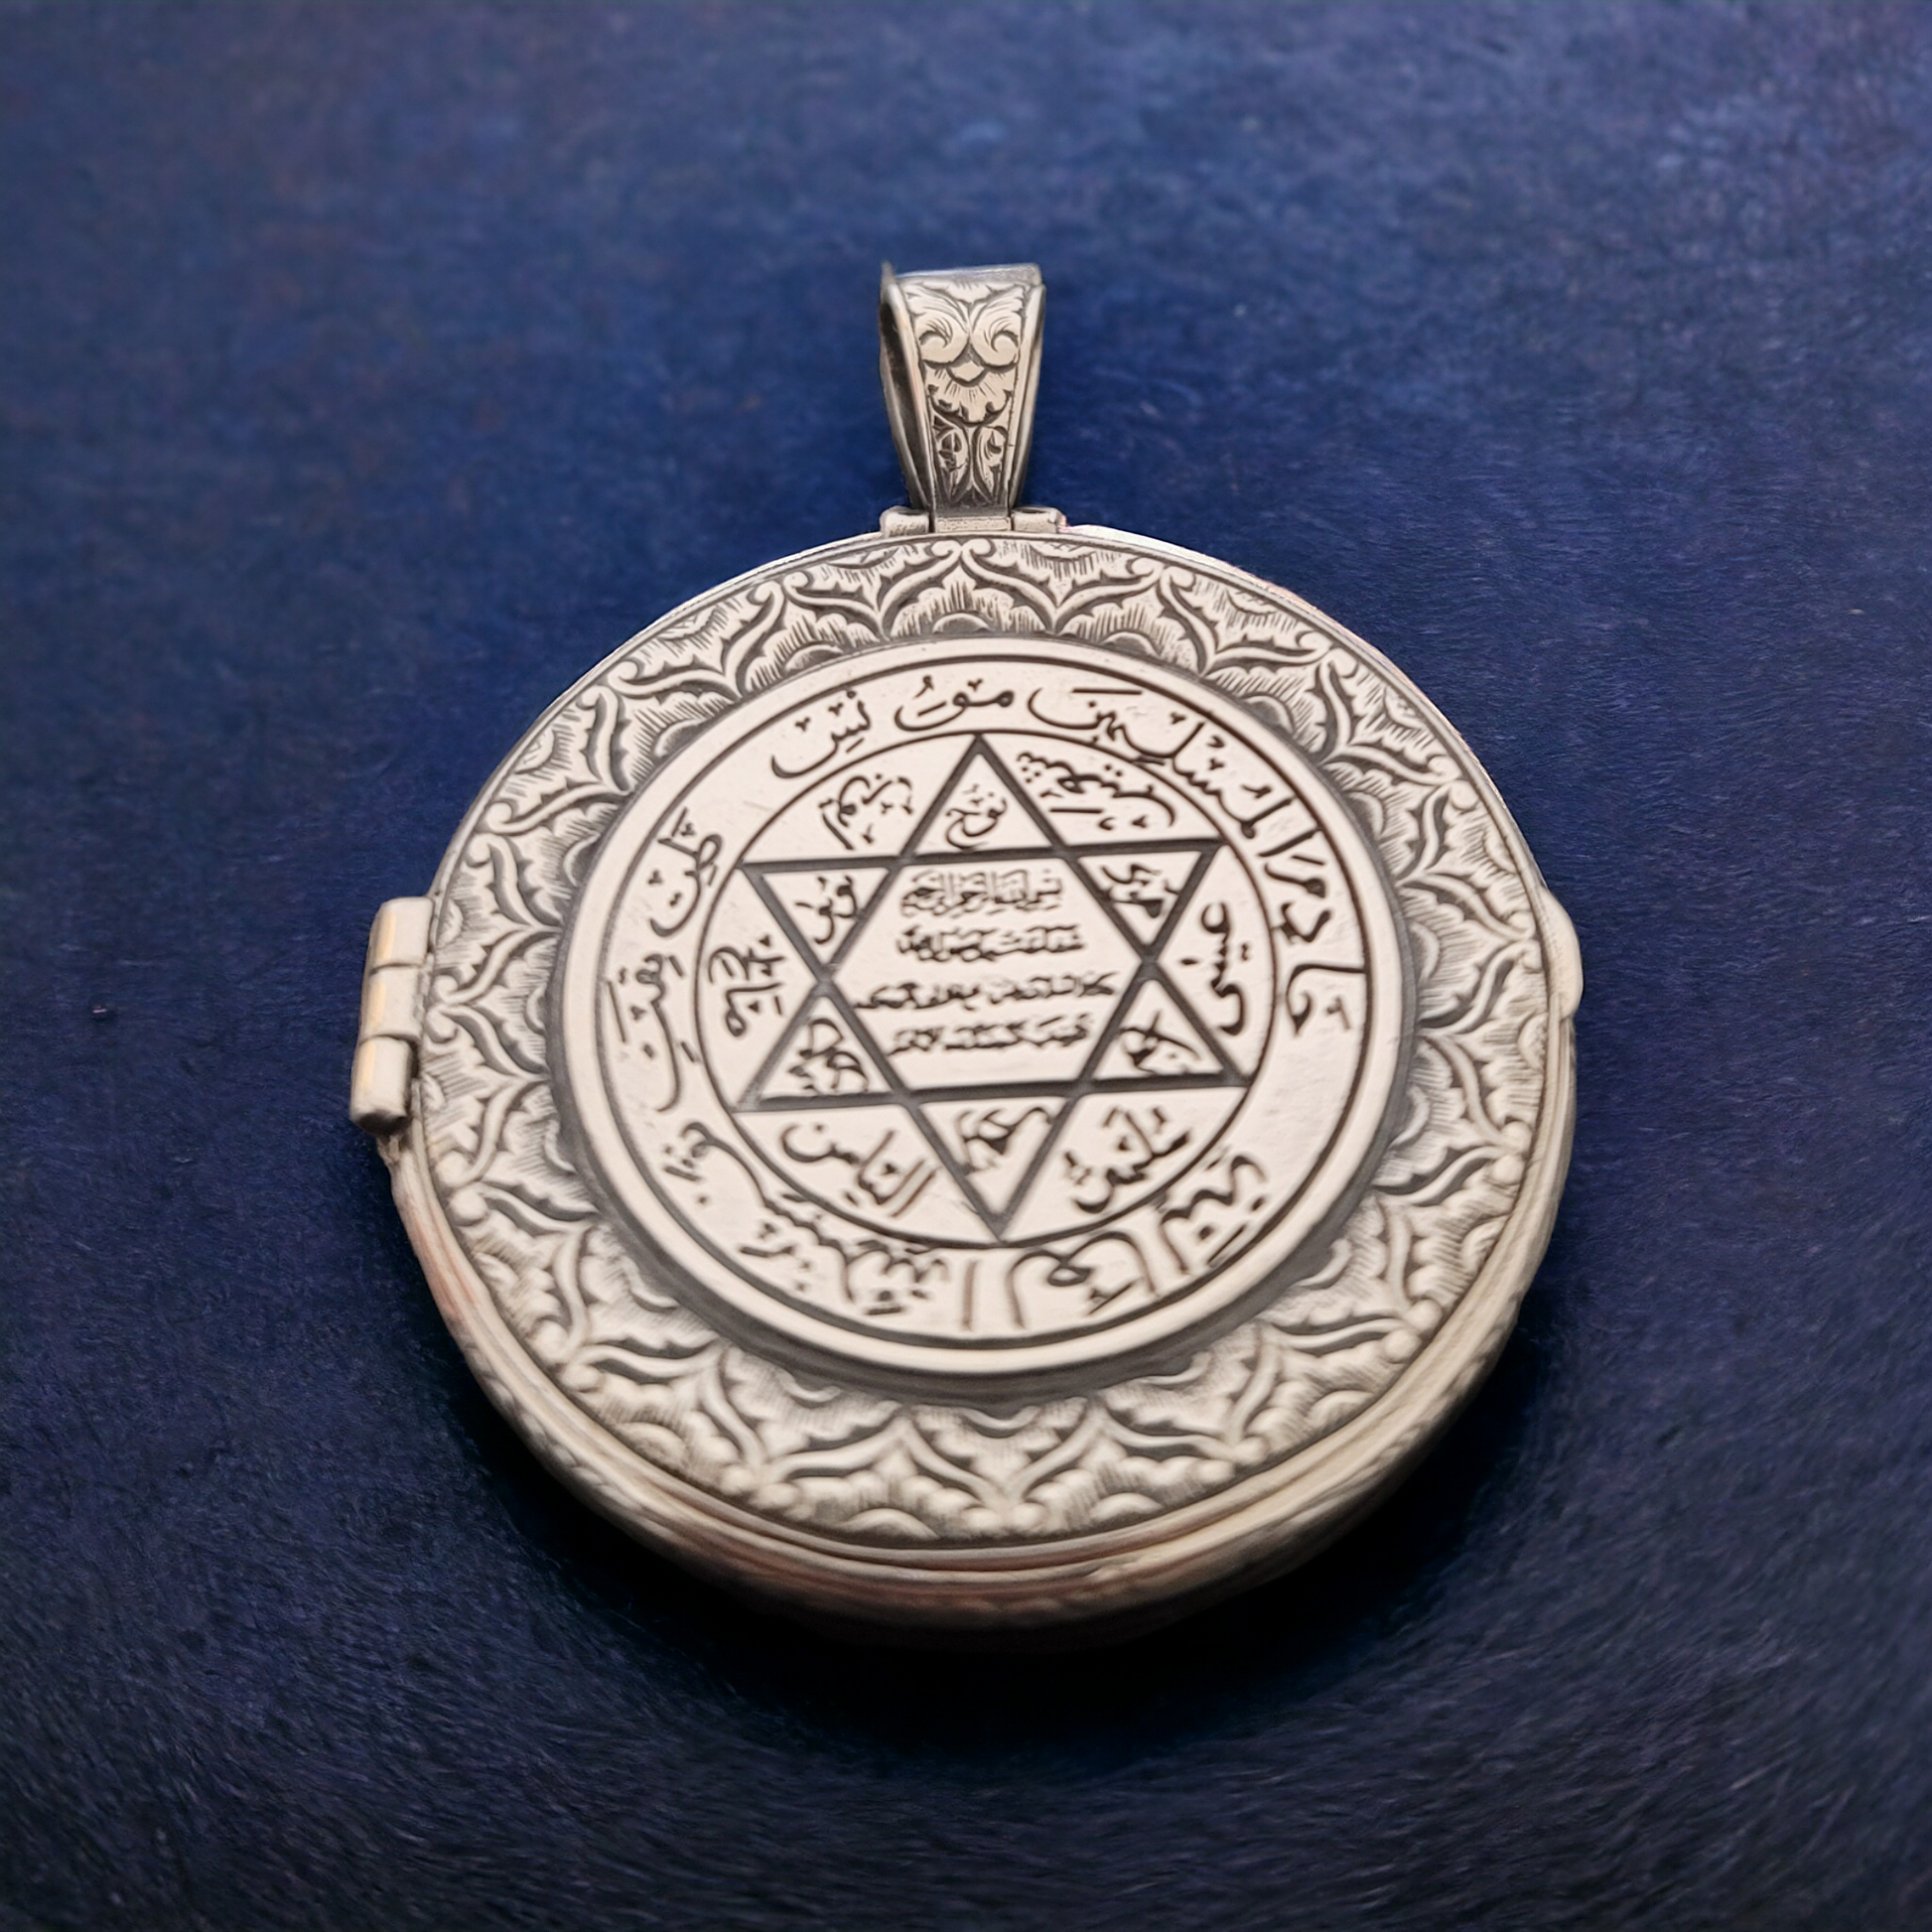 Necklace of four Seals